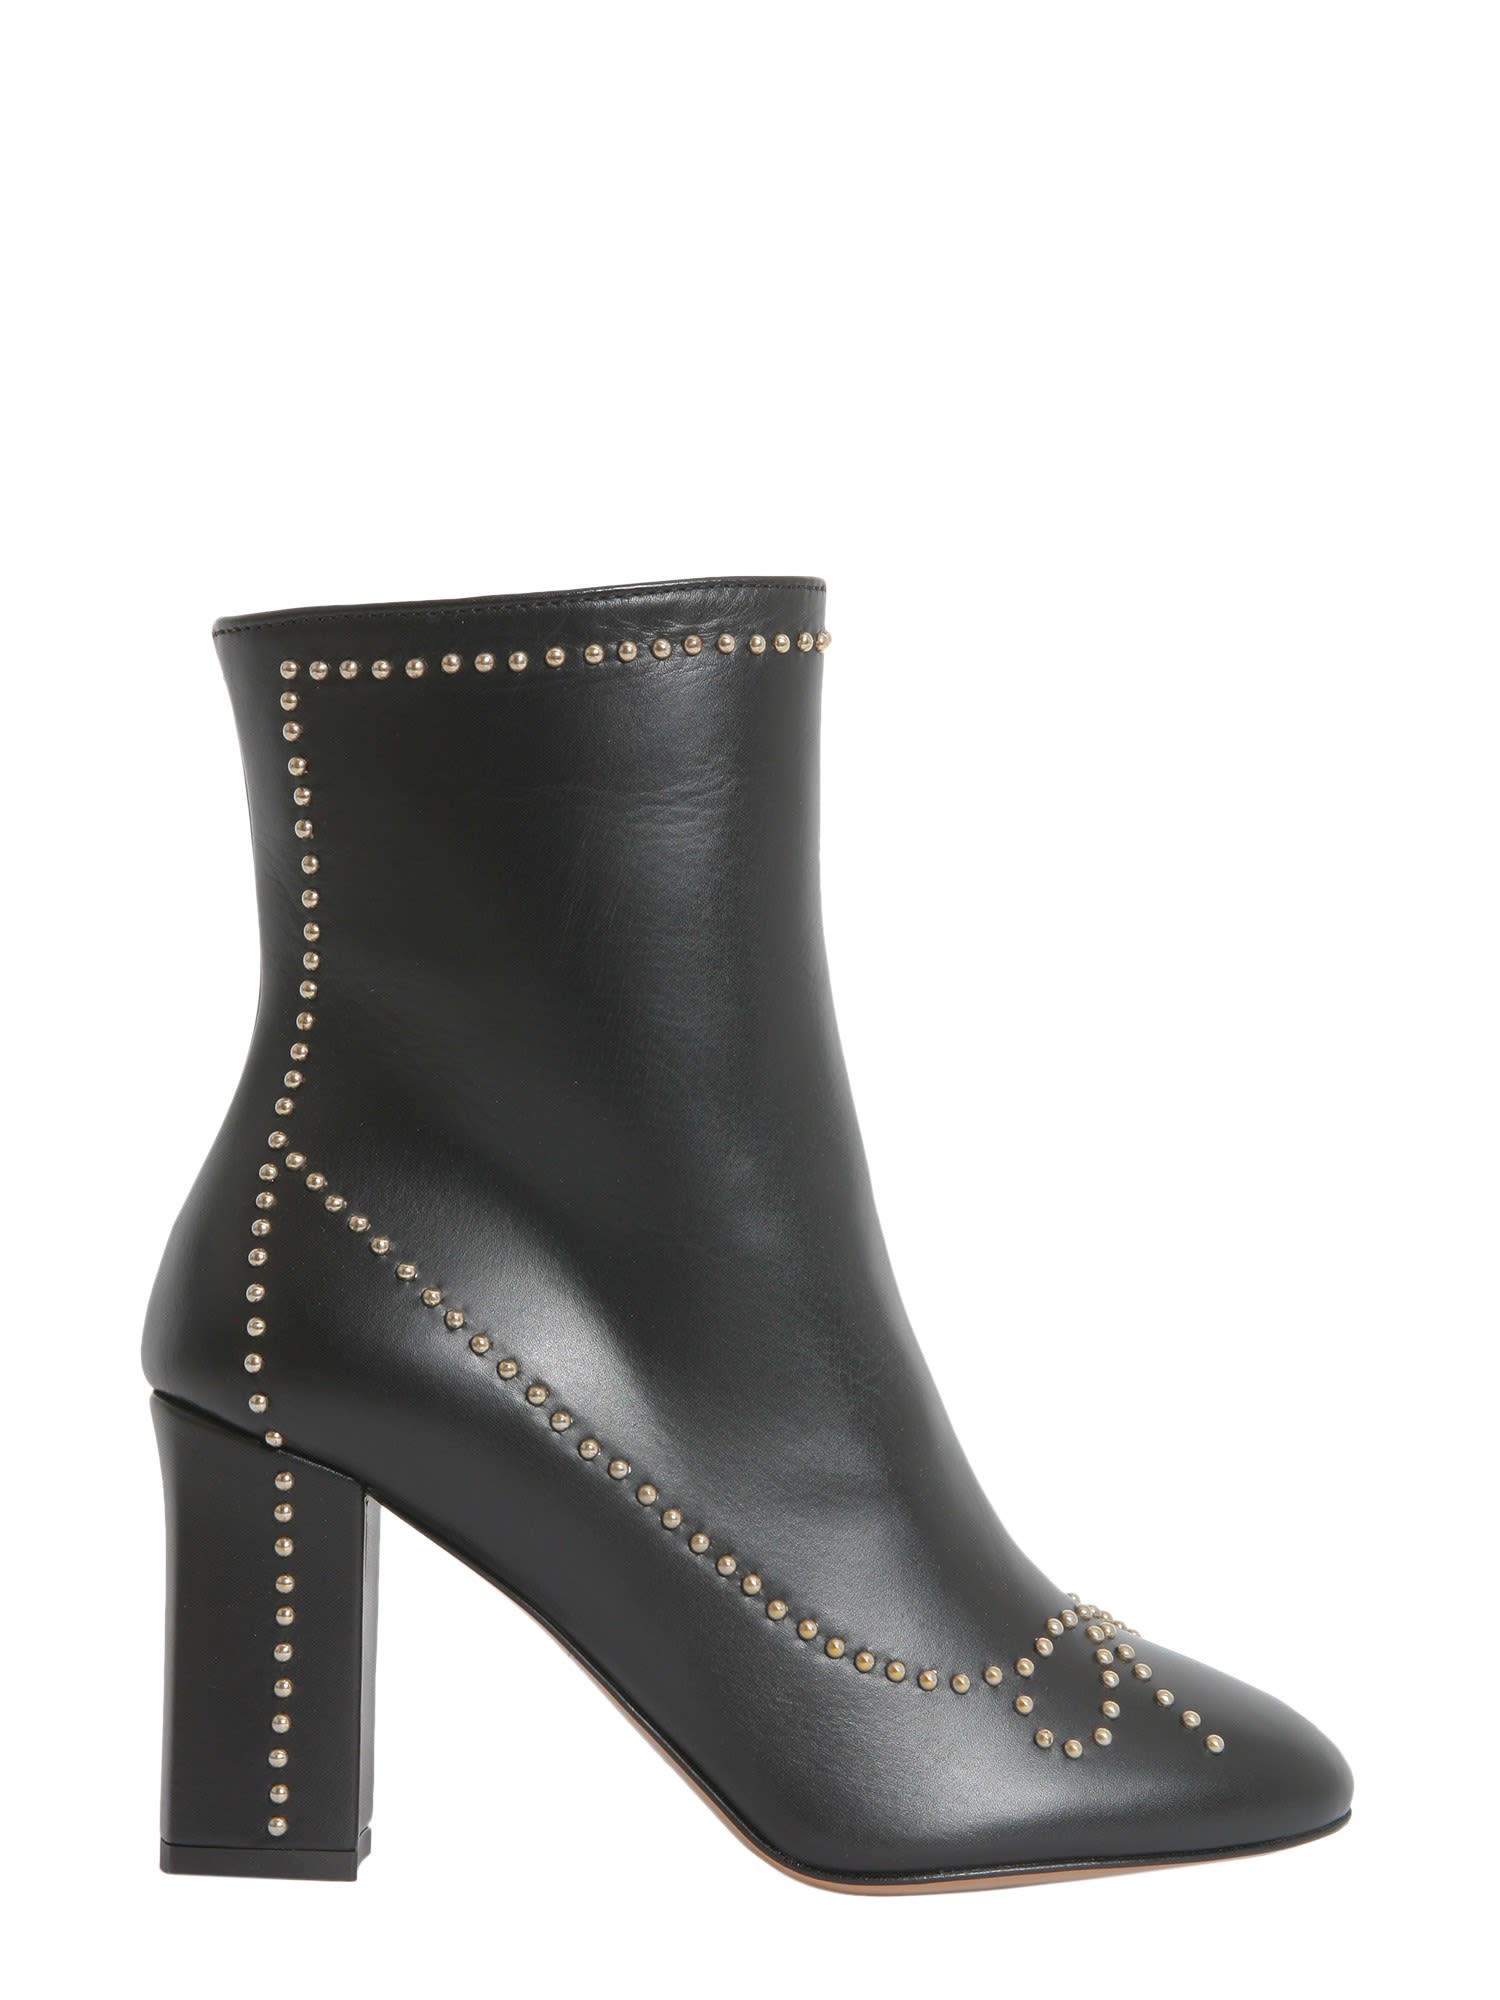 Boutique Moschino Studded Ankle Boots